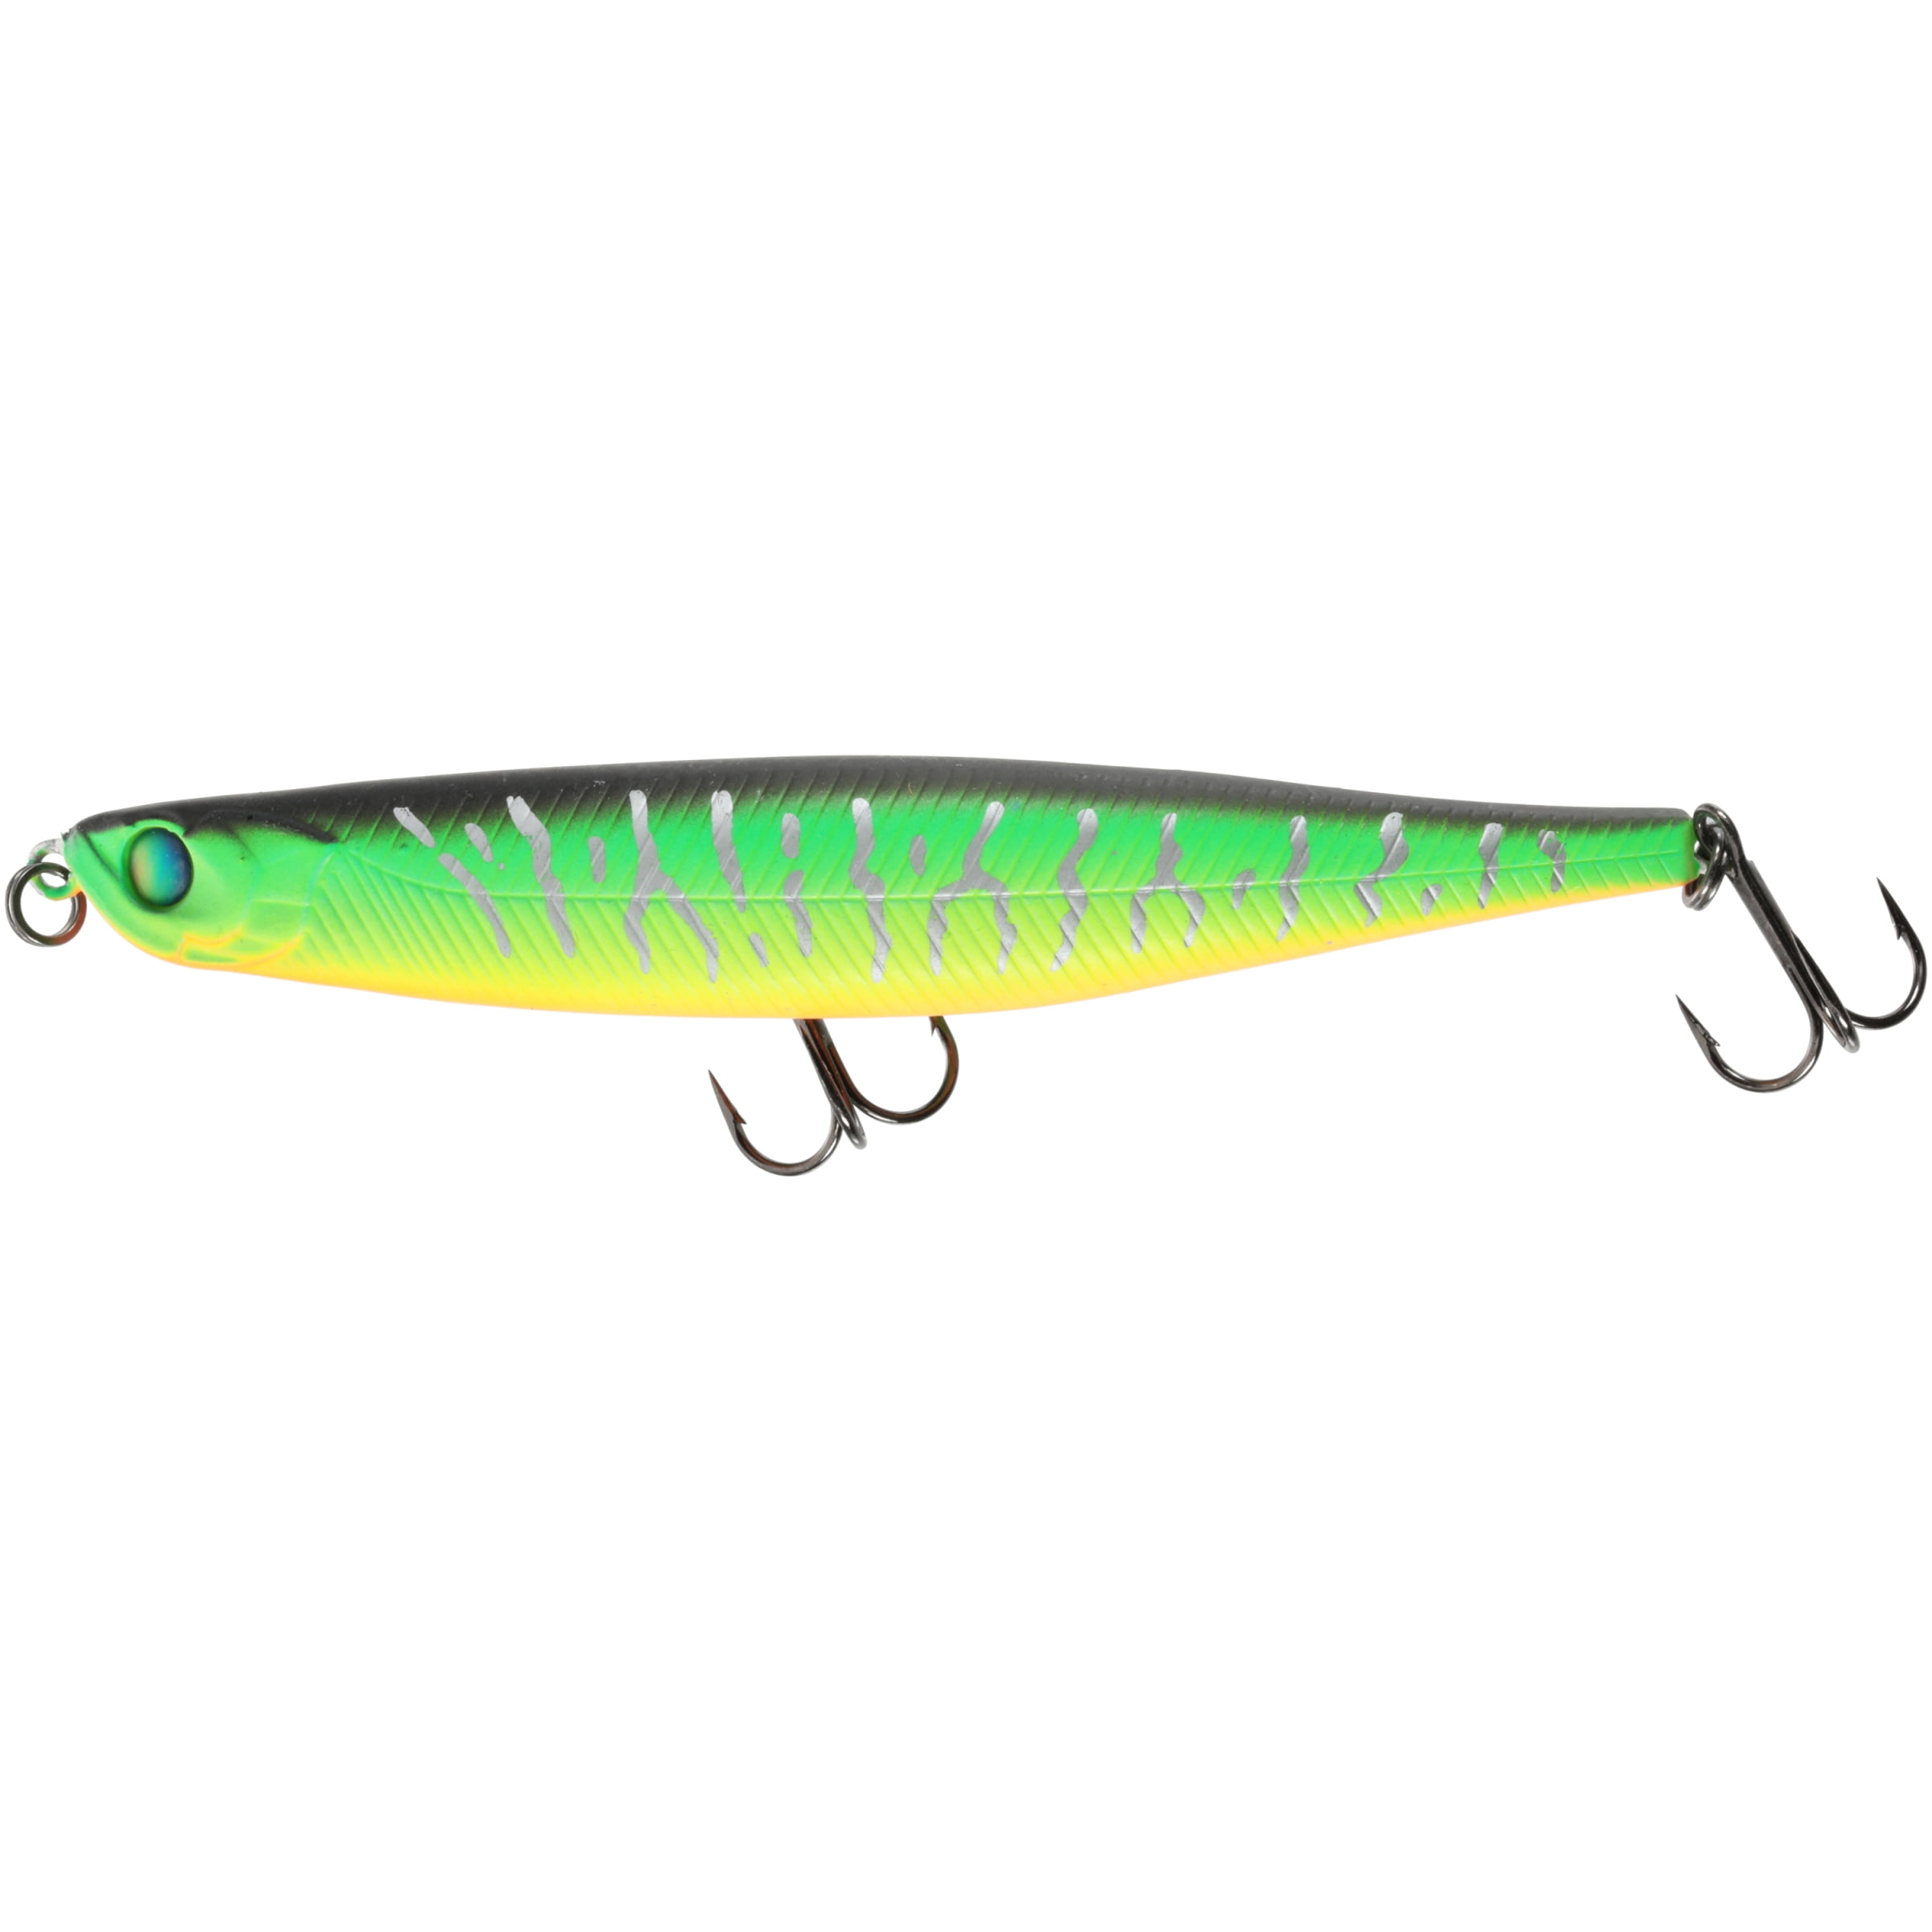 Renosky Lures LLC. J.R.'s Crippled Shiner 4 Fishing Lure Carded Pack